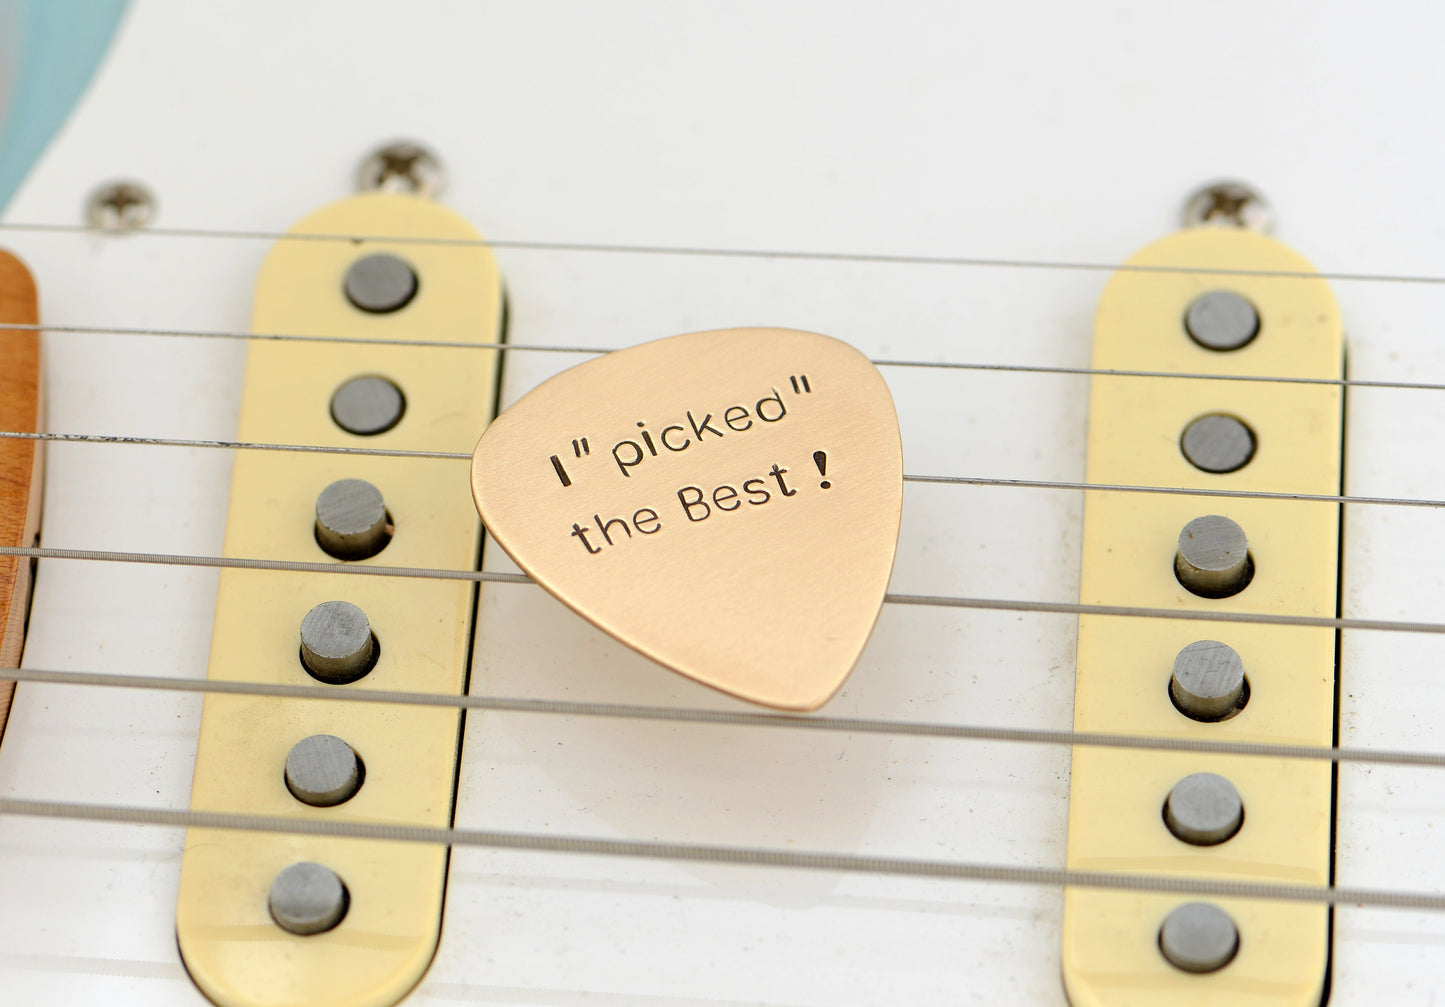 "I picked the best" guitar pick in bronze